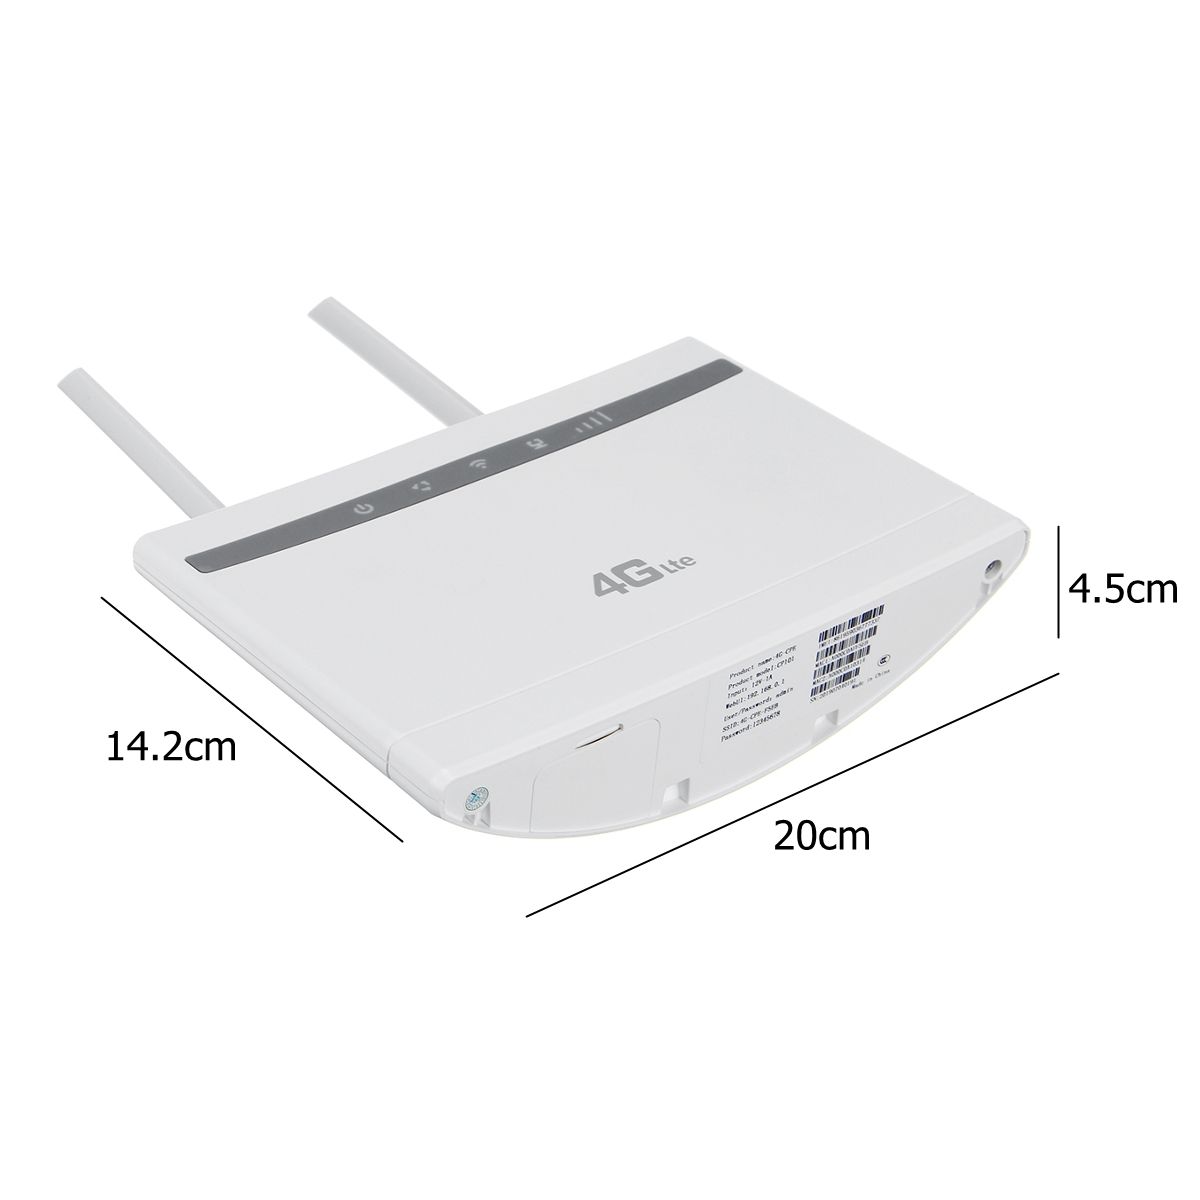 Wireless-WIFI-Router-300Mbps-3G-4G-LTE-CPE-WIFI-Router-Modem-300Mbps-with-Standard-Sim-Card-Slot-1572547